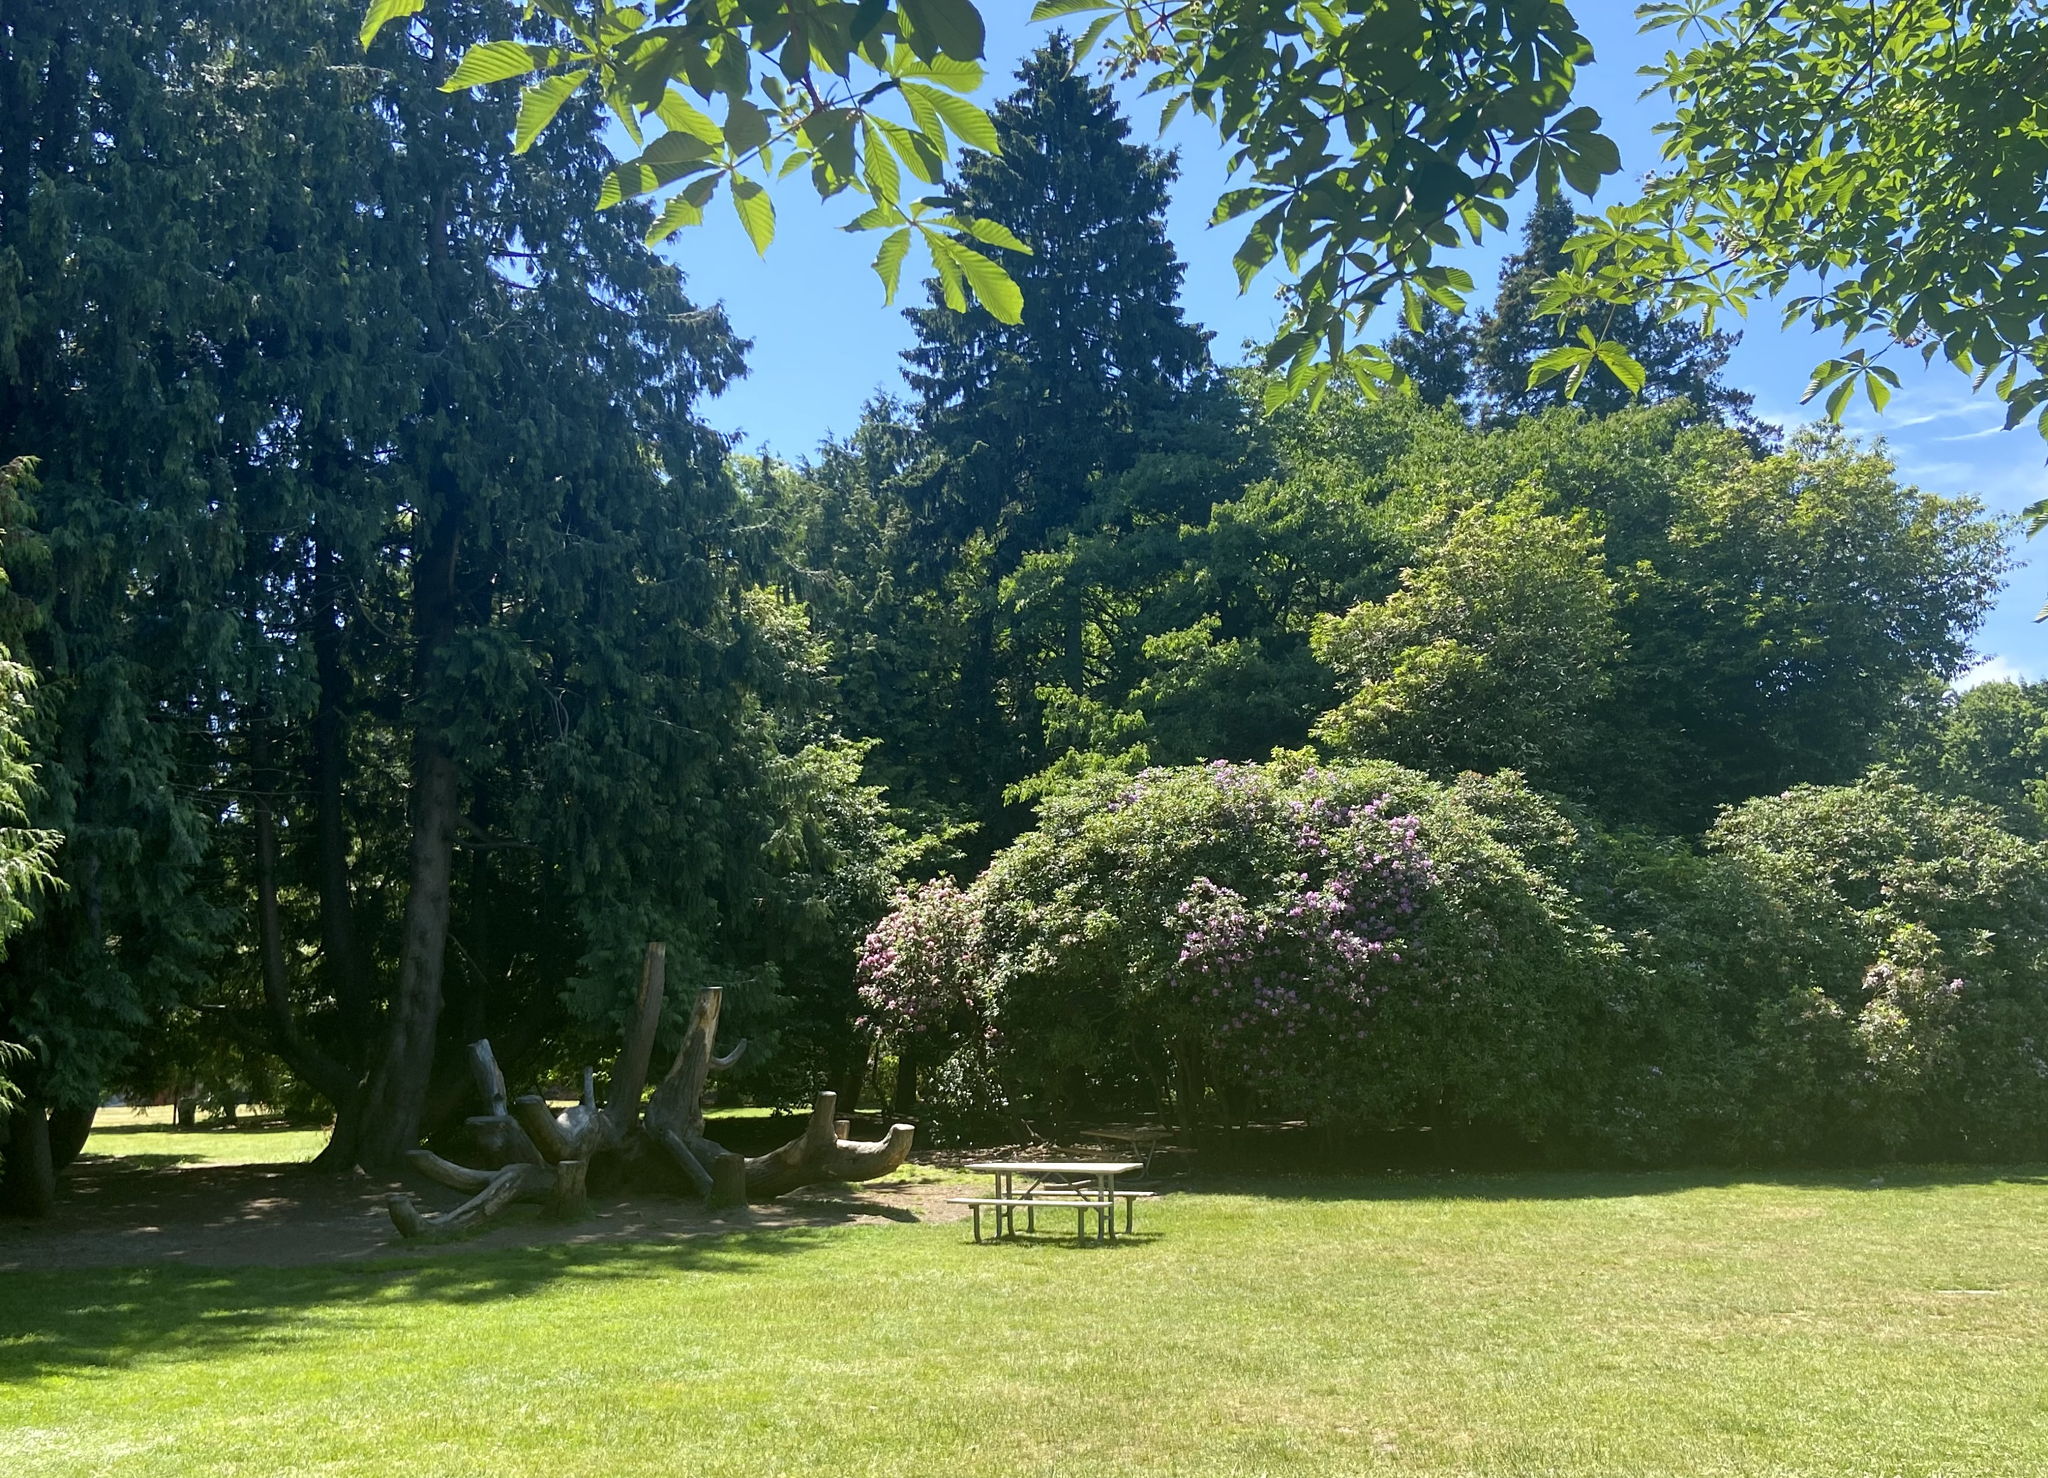 Enjoy a picnic at beautiful Volunteer Park that is a few blocks away from the home